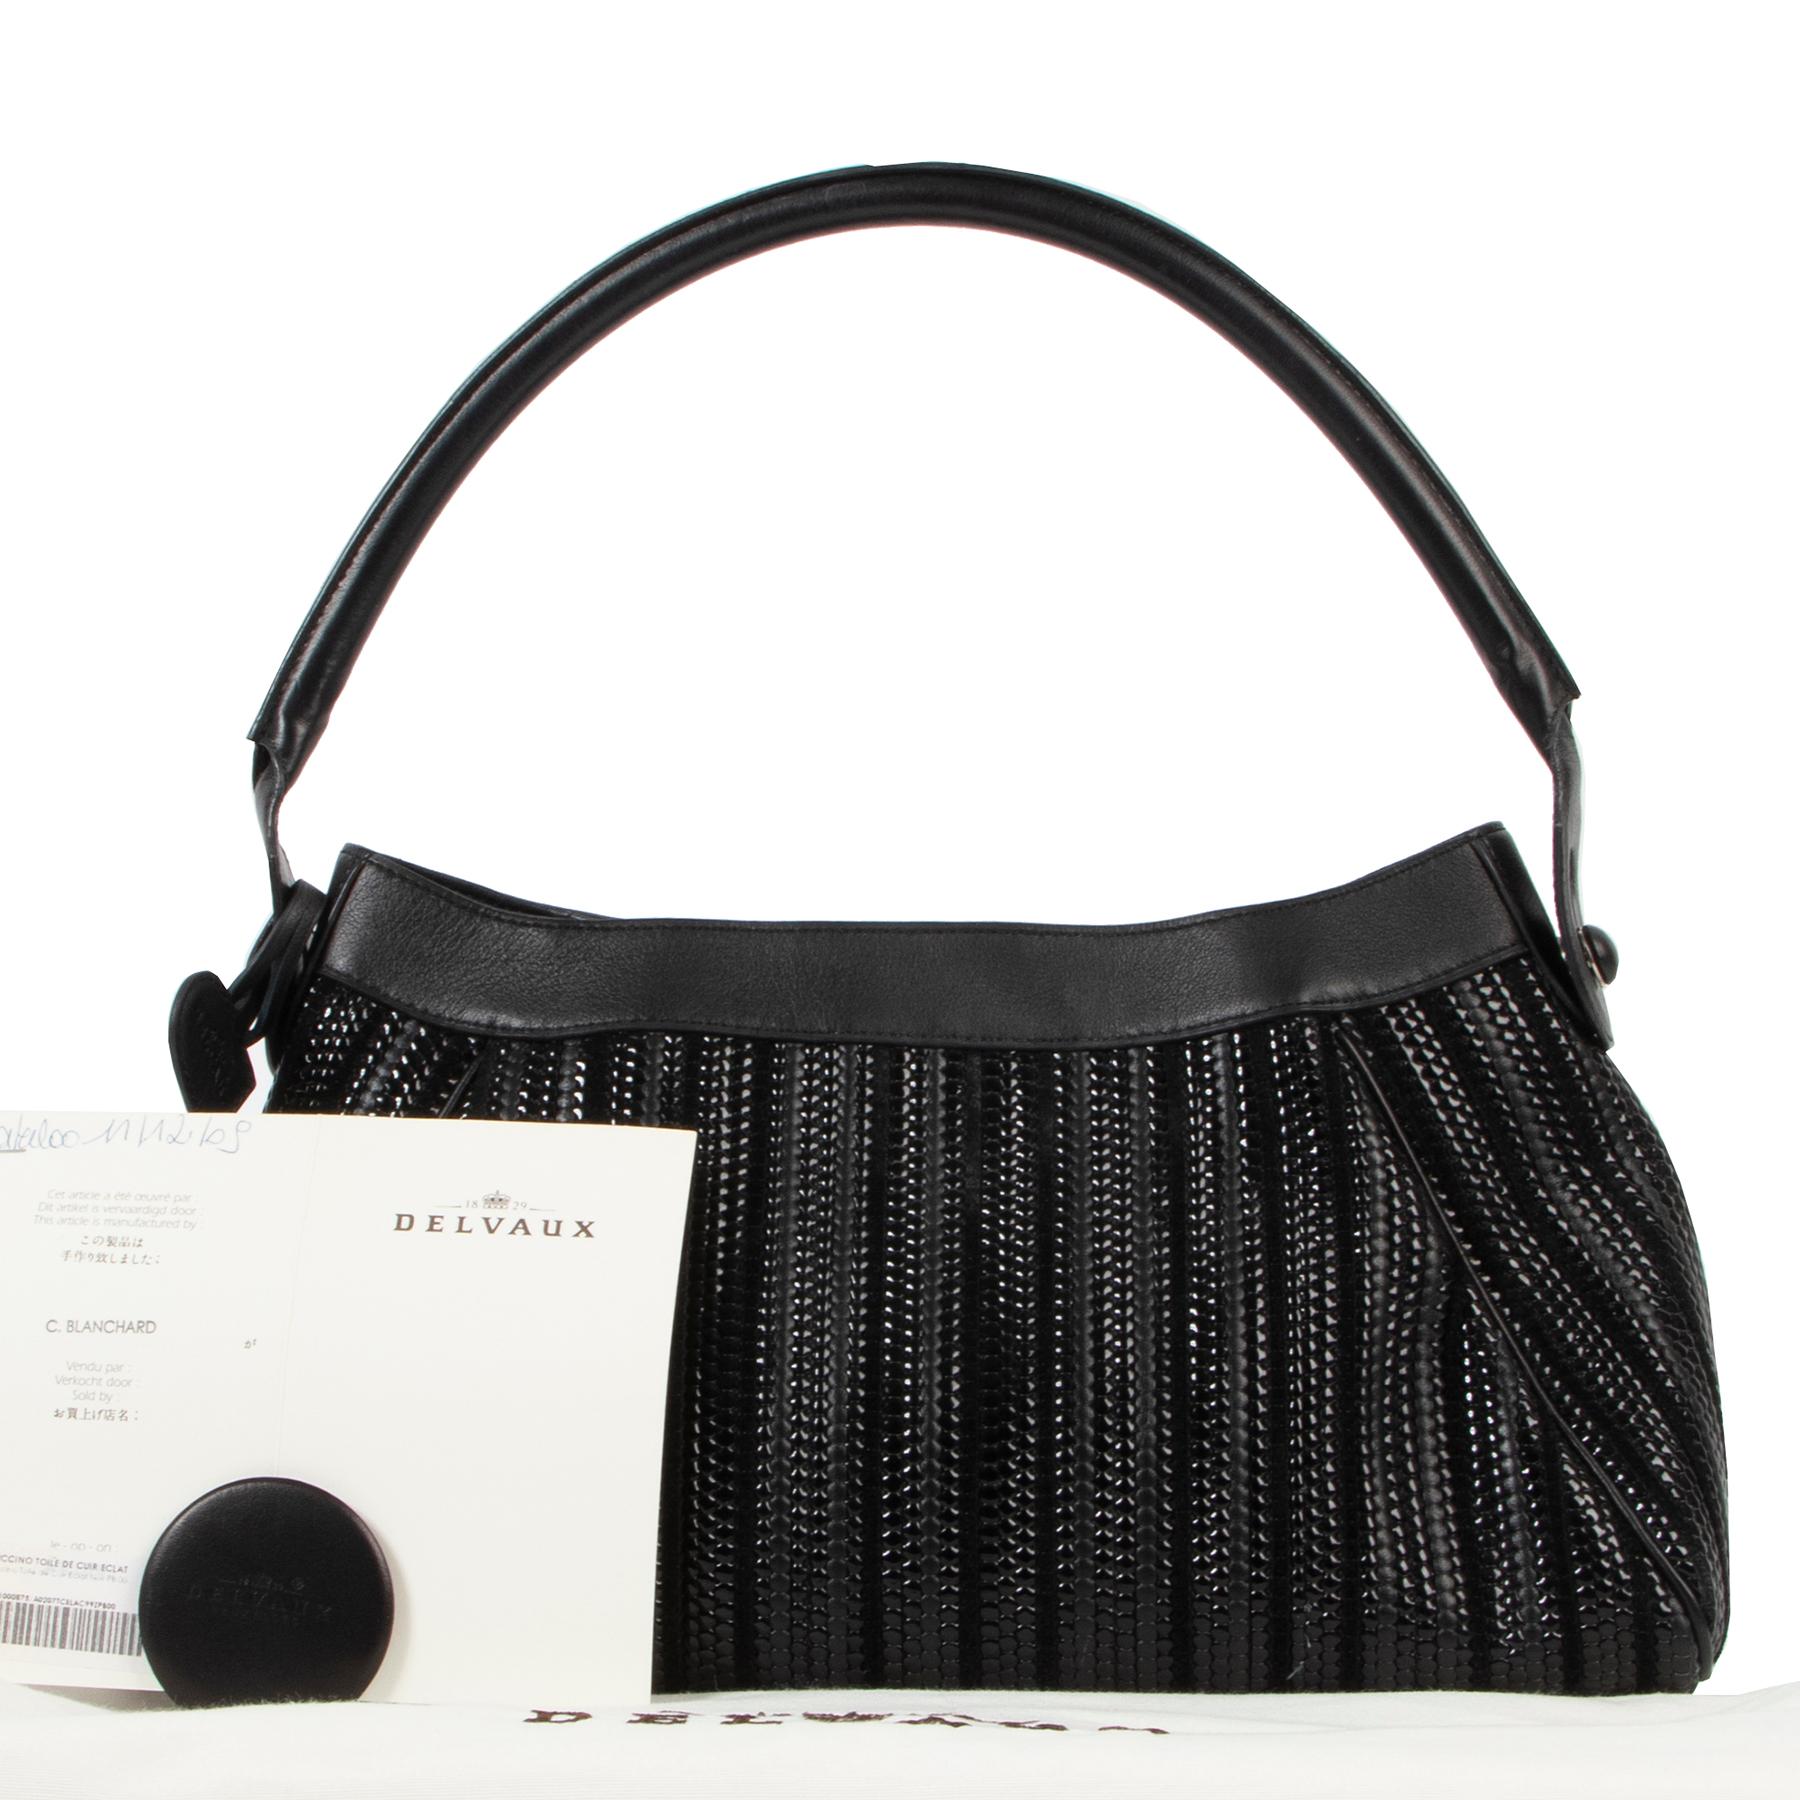 Delvaux Black Toile De Cuir Cuppucino Shoulder Bag

What a stunner, this Delvaux shoulder bag!

Crafted in Delvaux's iconic toile de cuir leather. This highly artisanal leather is made from woven strips of different leathers. Toile de Cuir is